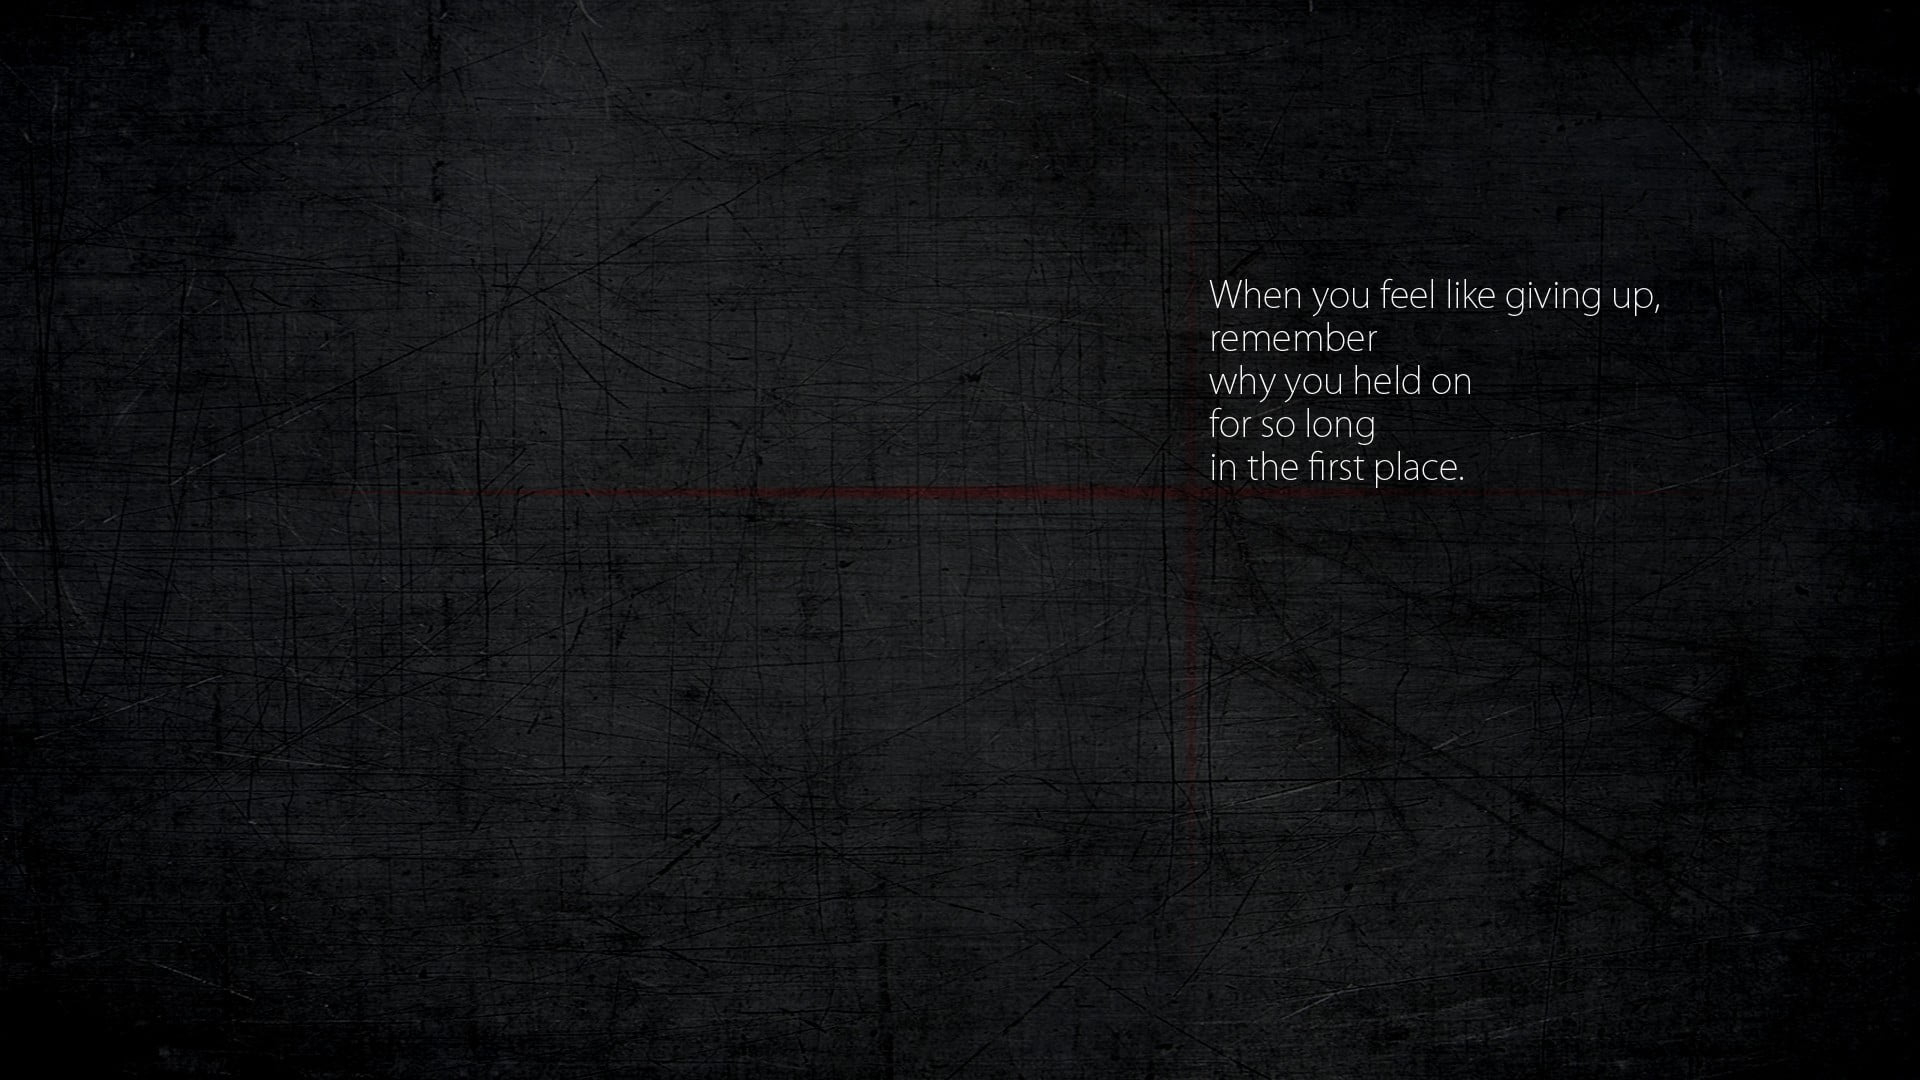 white text with black background, When you feel like giving up, remember why you held on for so long in the first place.